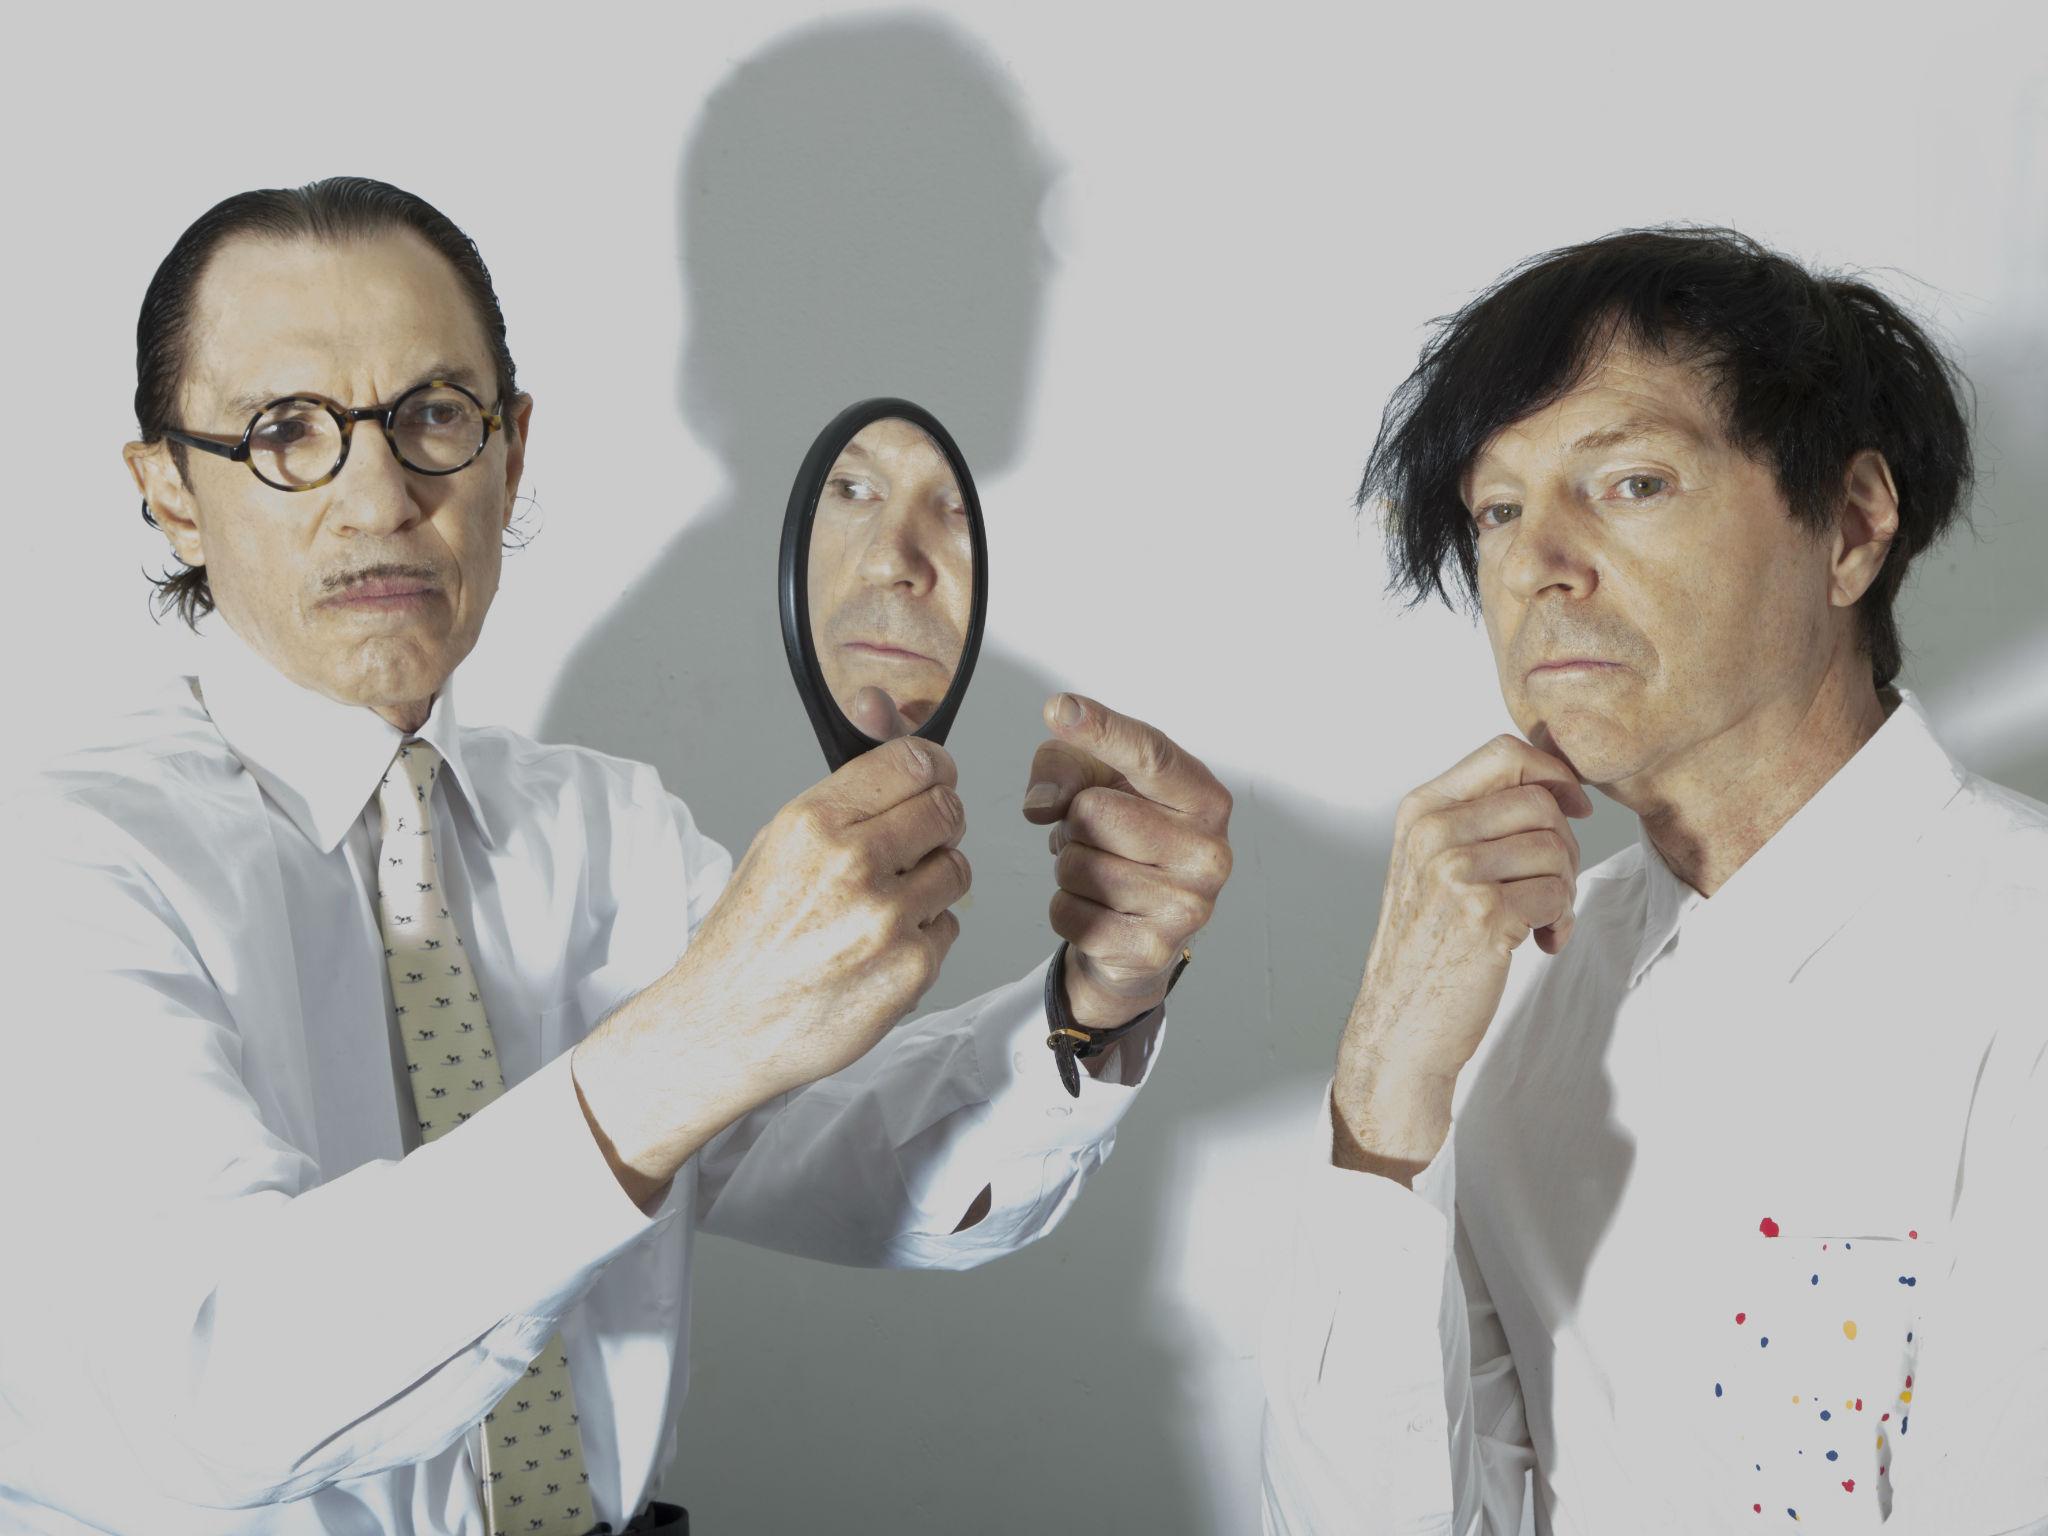 The brothers Ron (left) and Russell Mael (right) who formed Sparks in 1972 are back with a new album